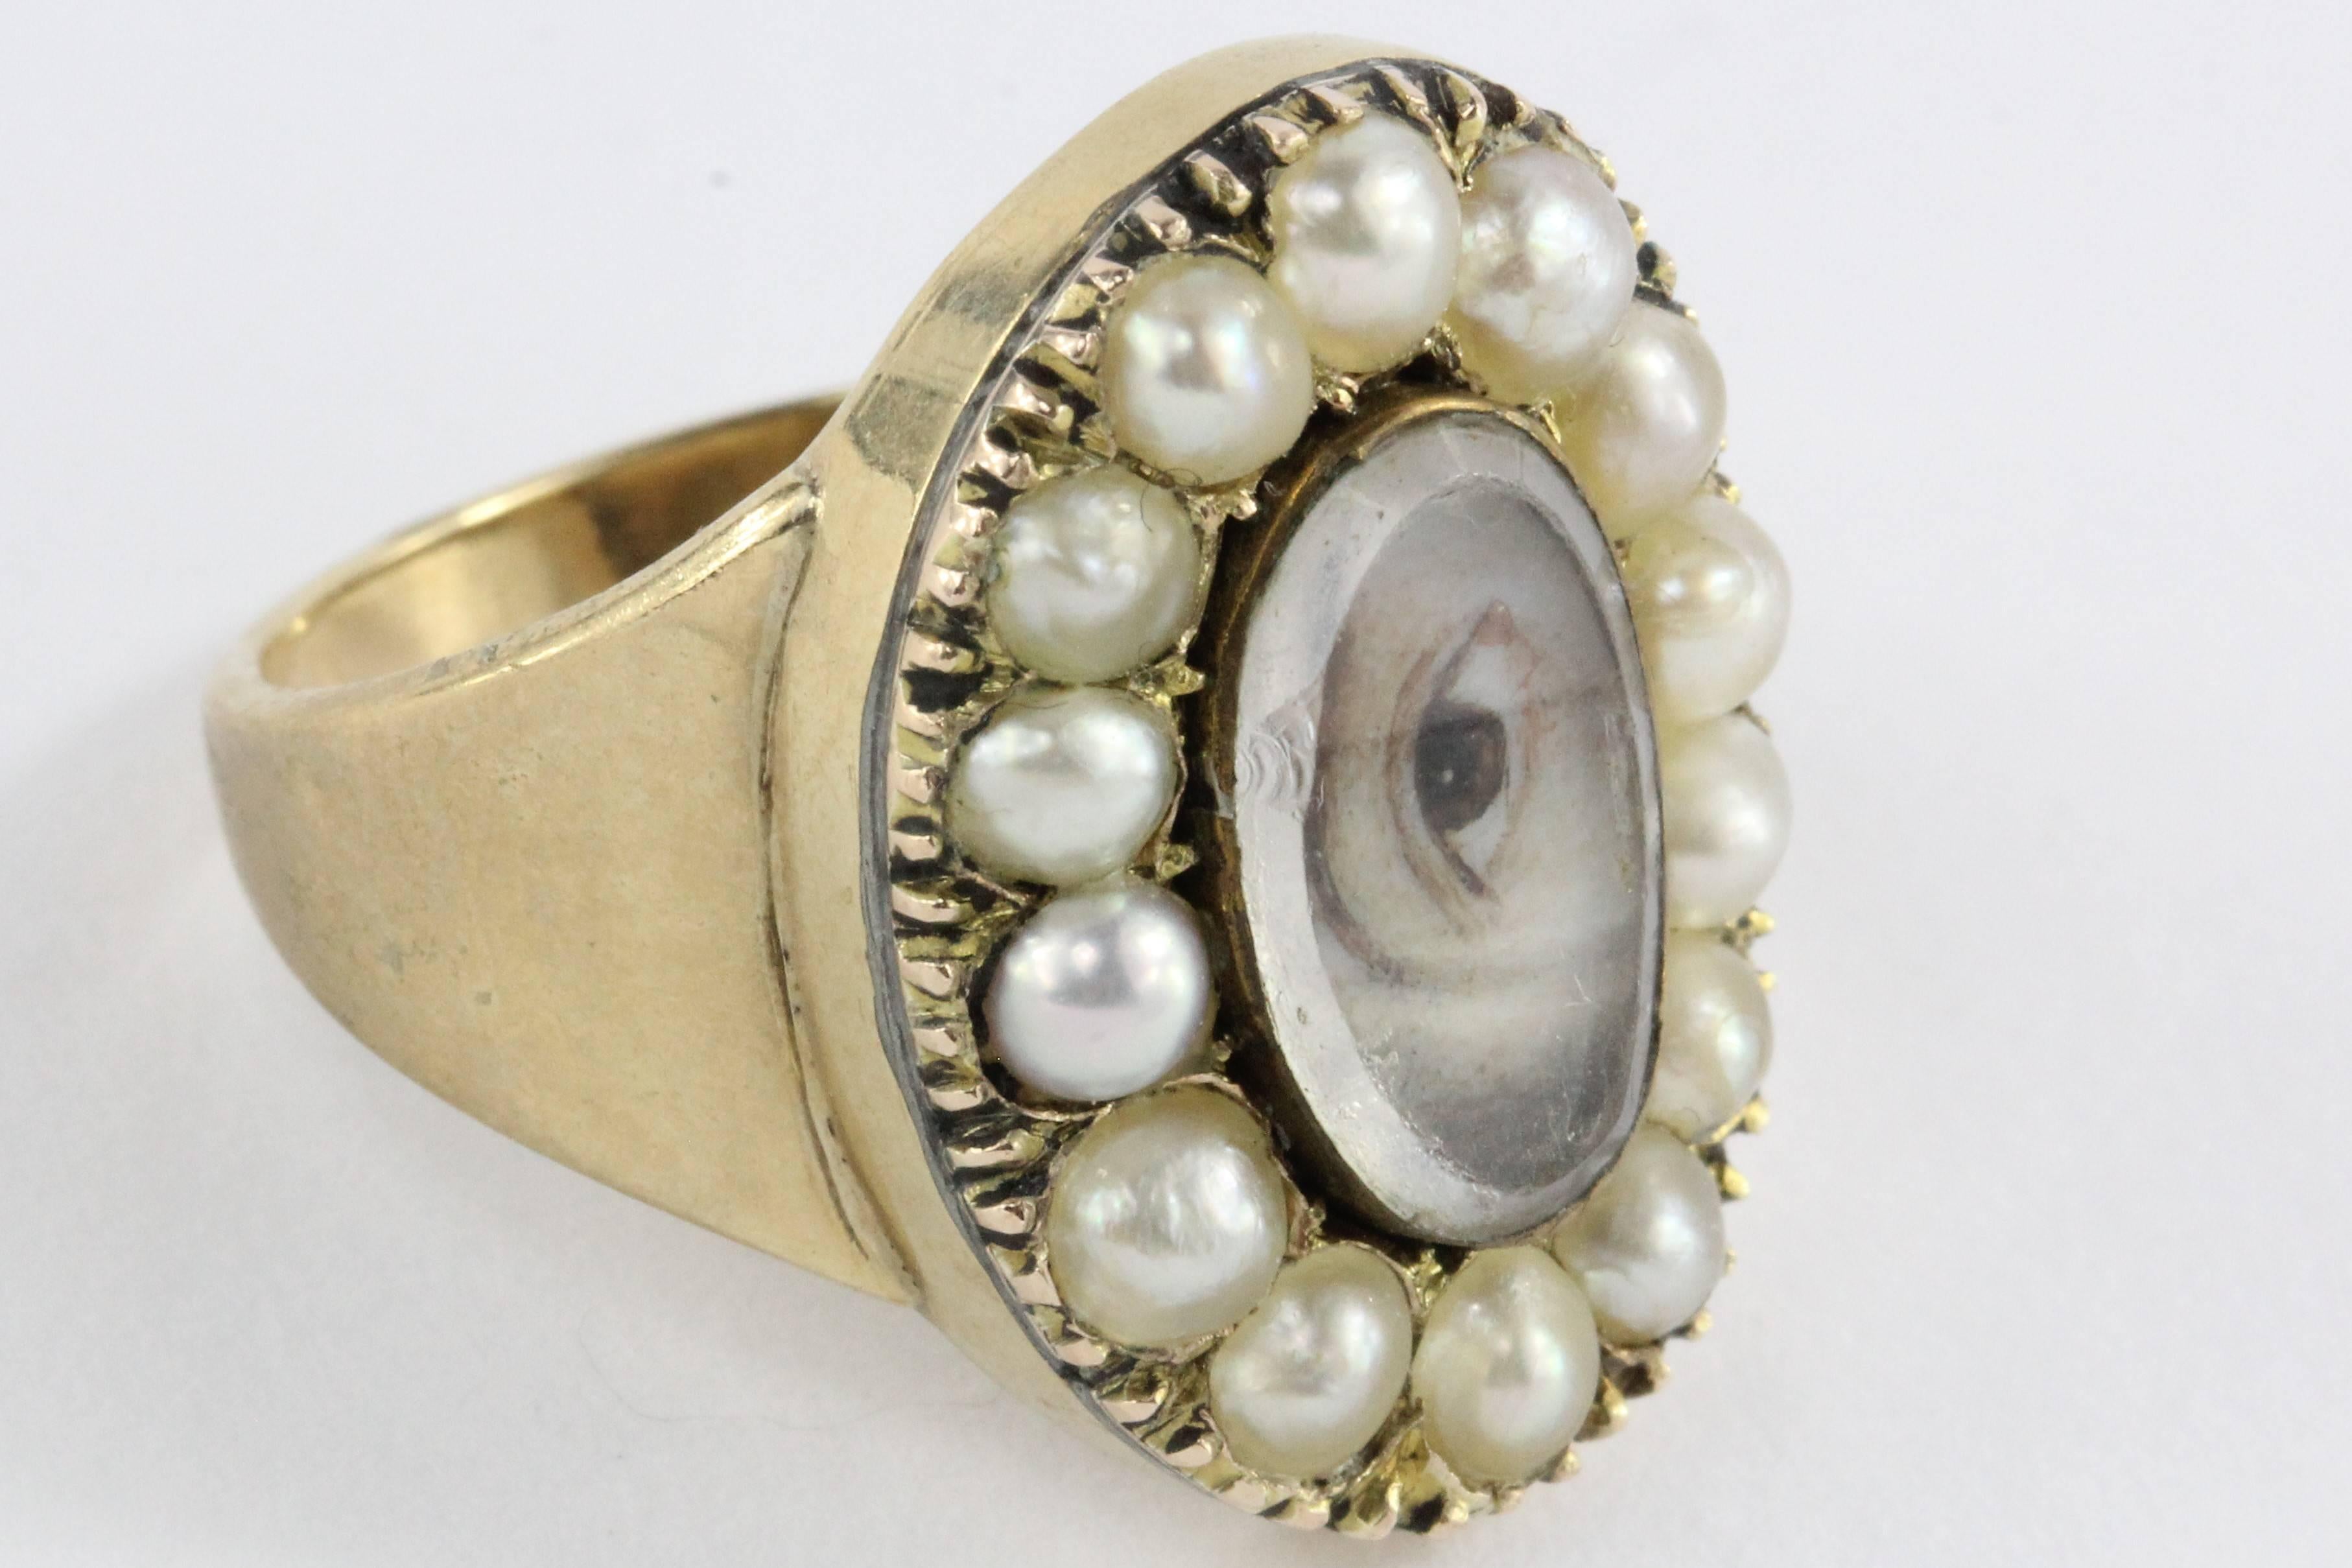 Miniature portrait painted in watercolor portraying a male eye. The lover’s eye is set with beveled crystal to protect the watercolor painting and is framed by natural pearls set in 9K gold. The back of the ring reads "In memory of  RY HORATIO